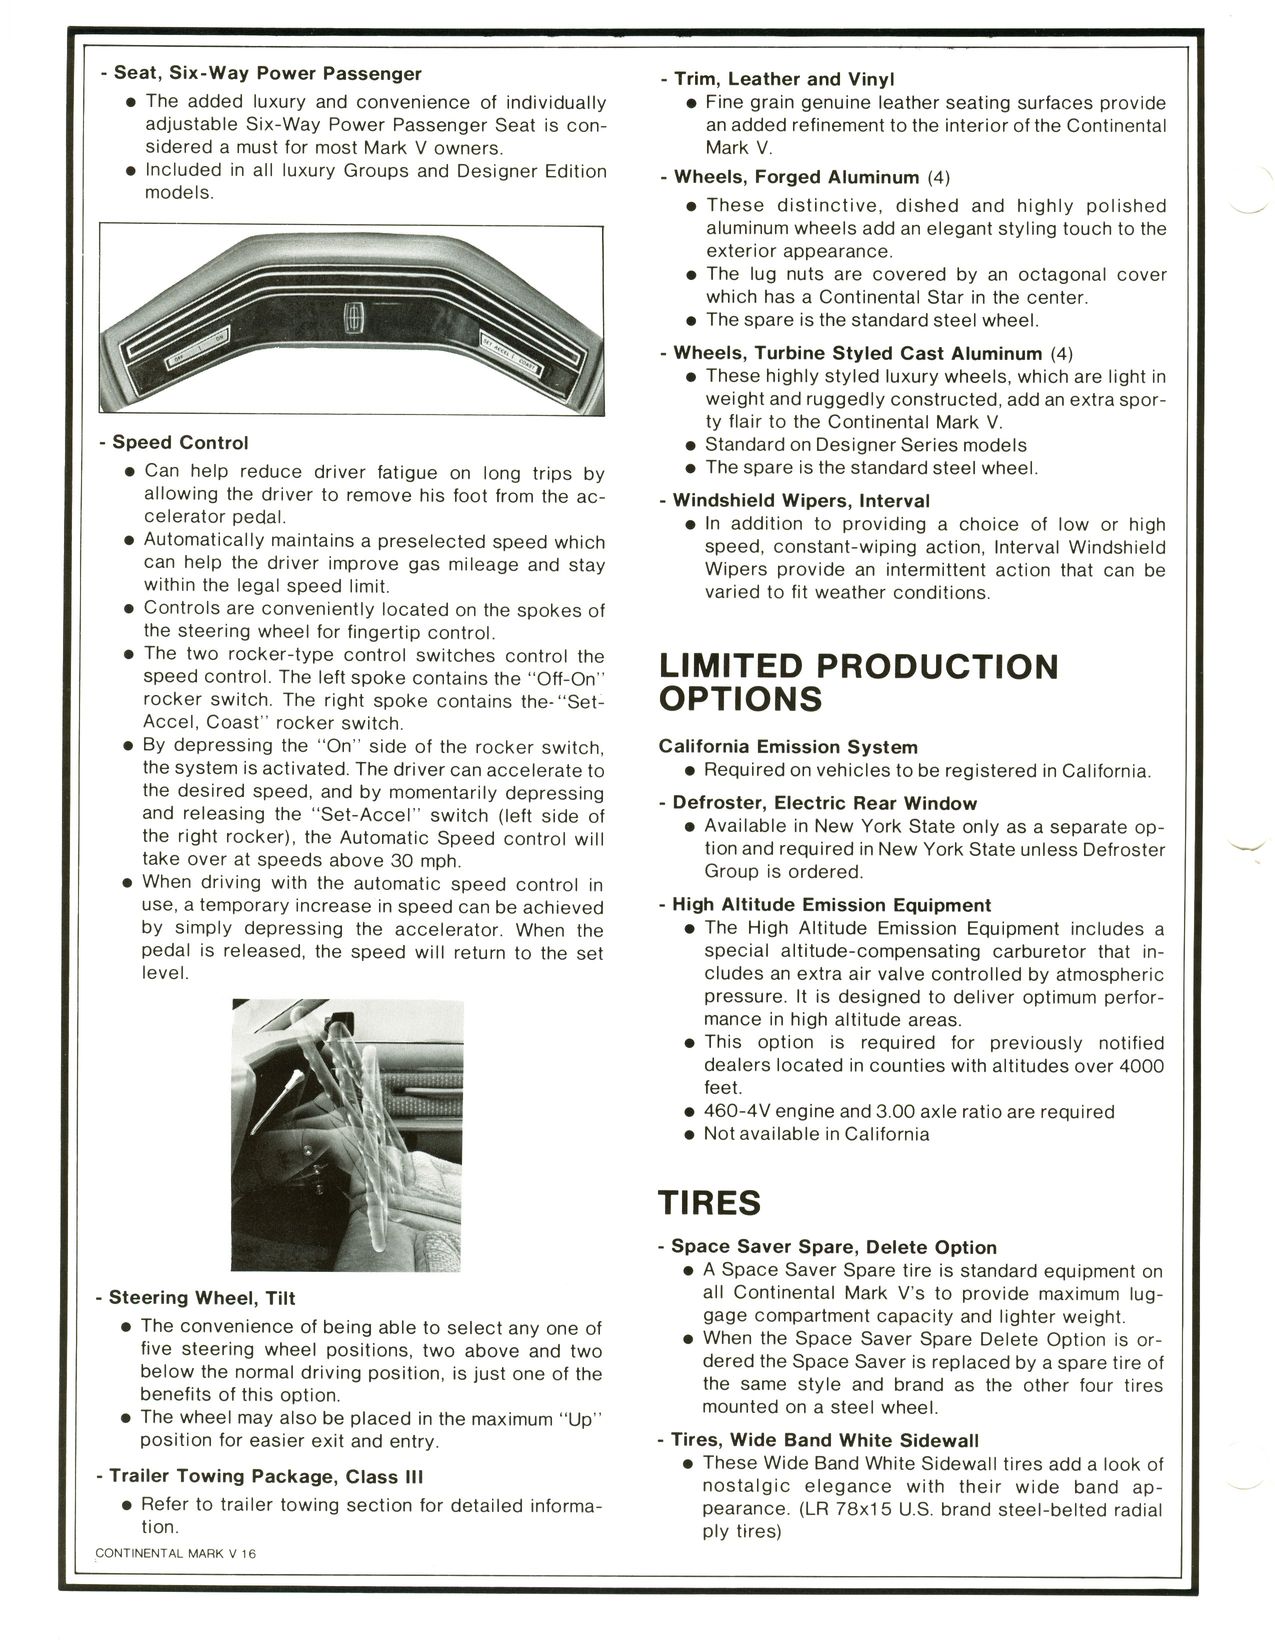 1977 Lincoln Continental Mark V Product Facts Book Page 18